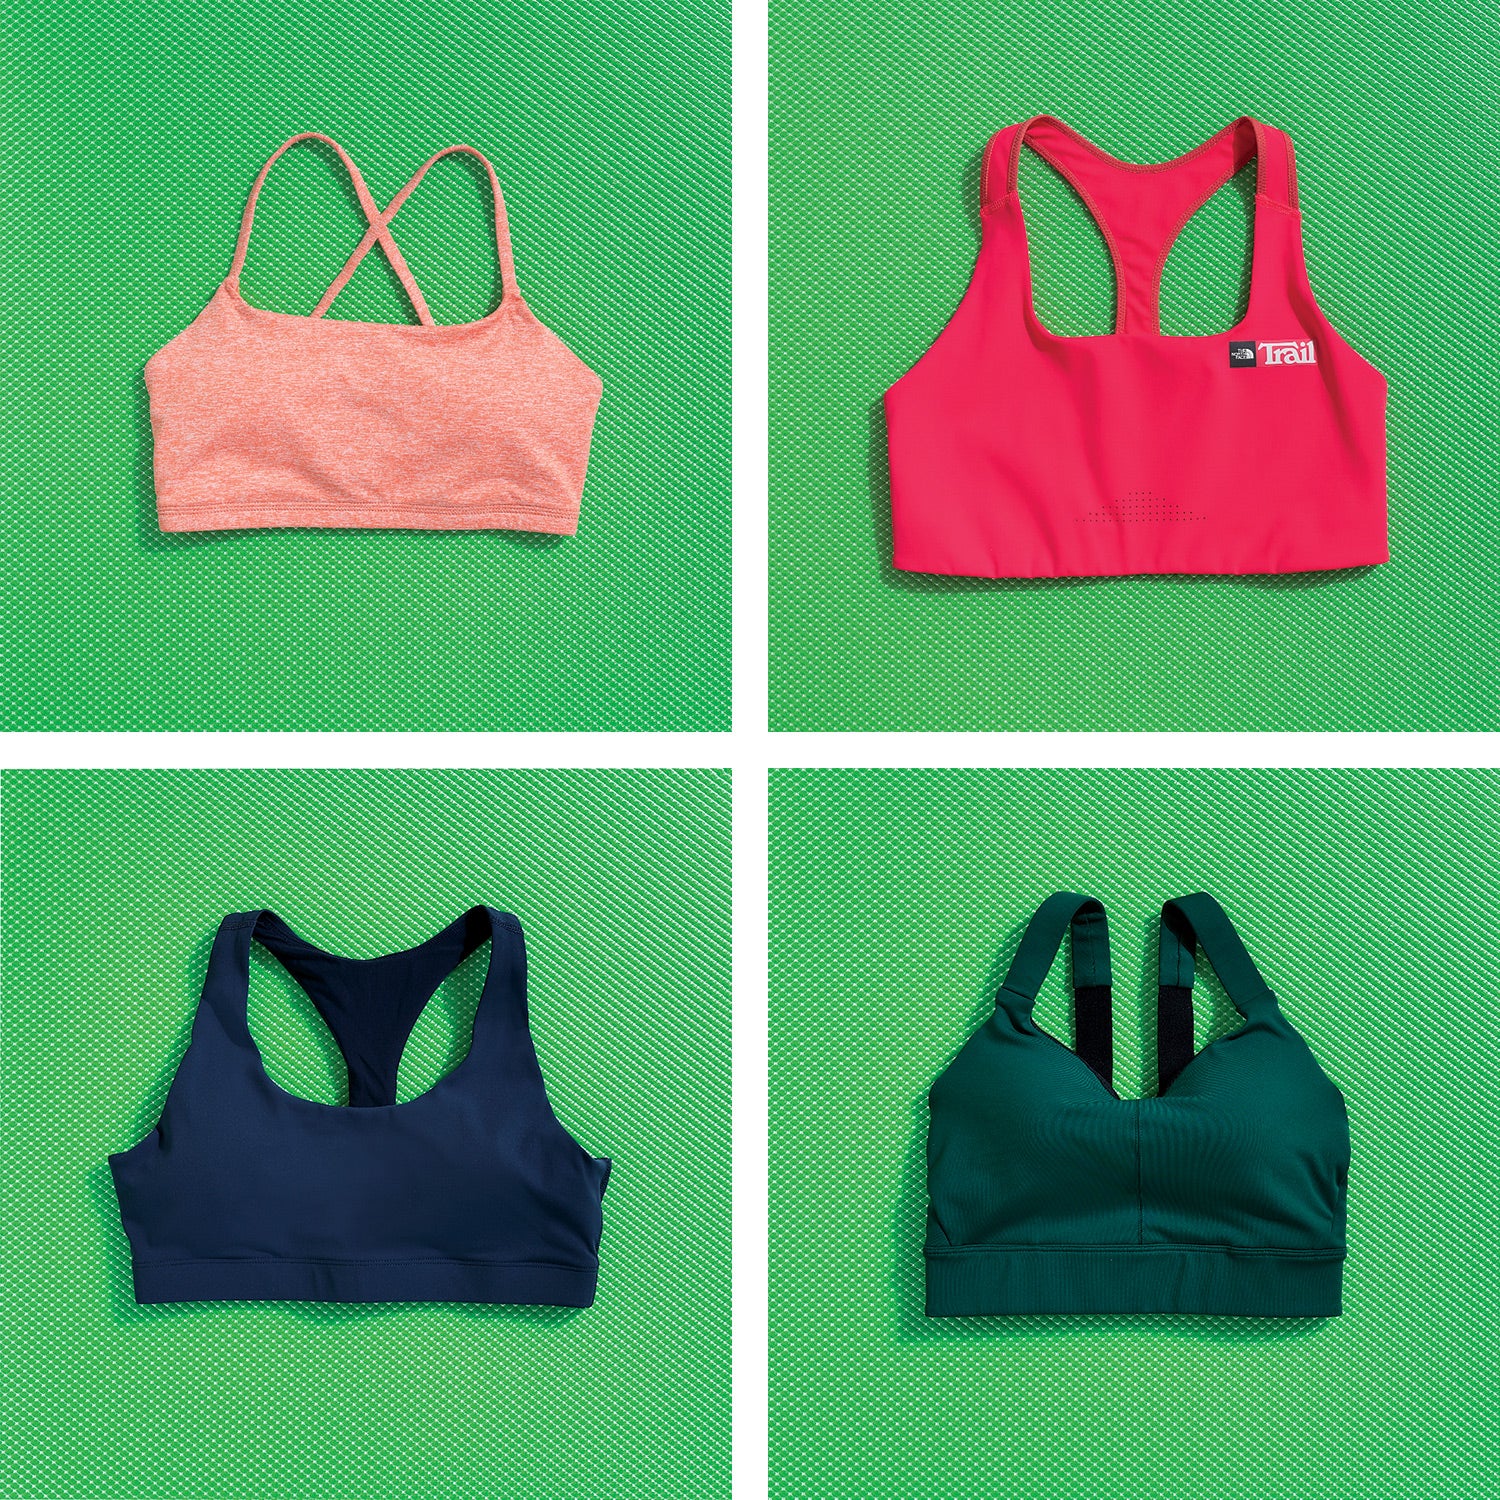 Hurry! Order The Best Full Coverage Bra Before It Sells Out At